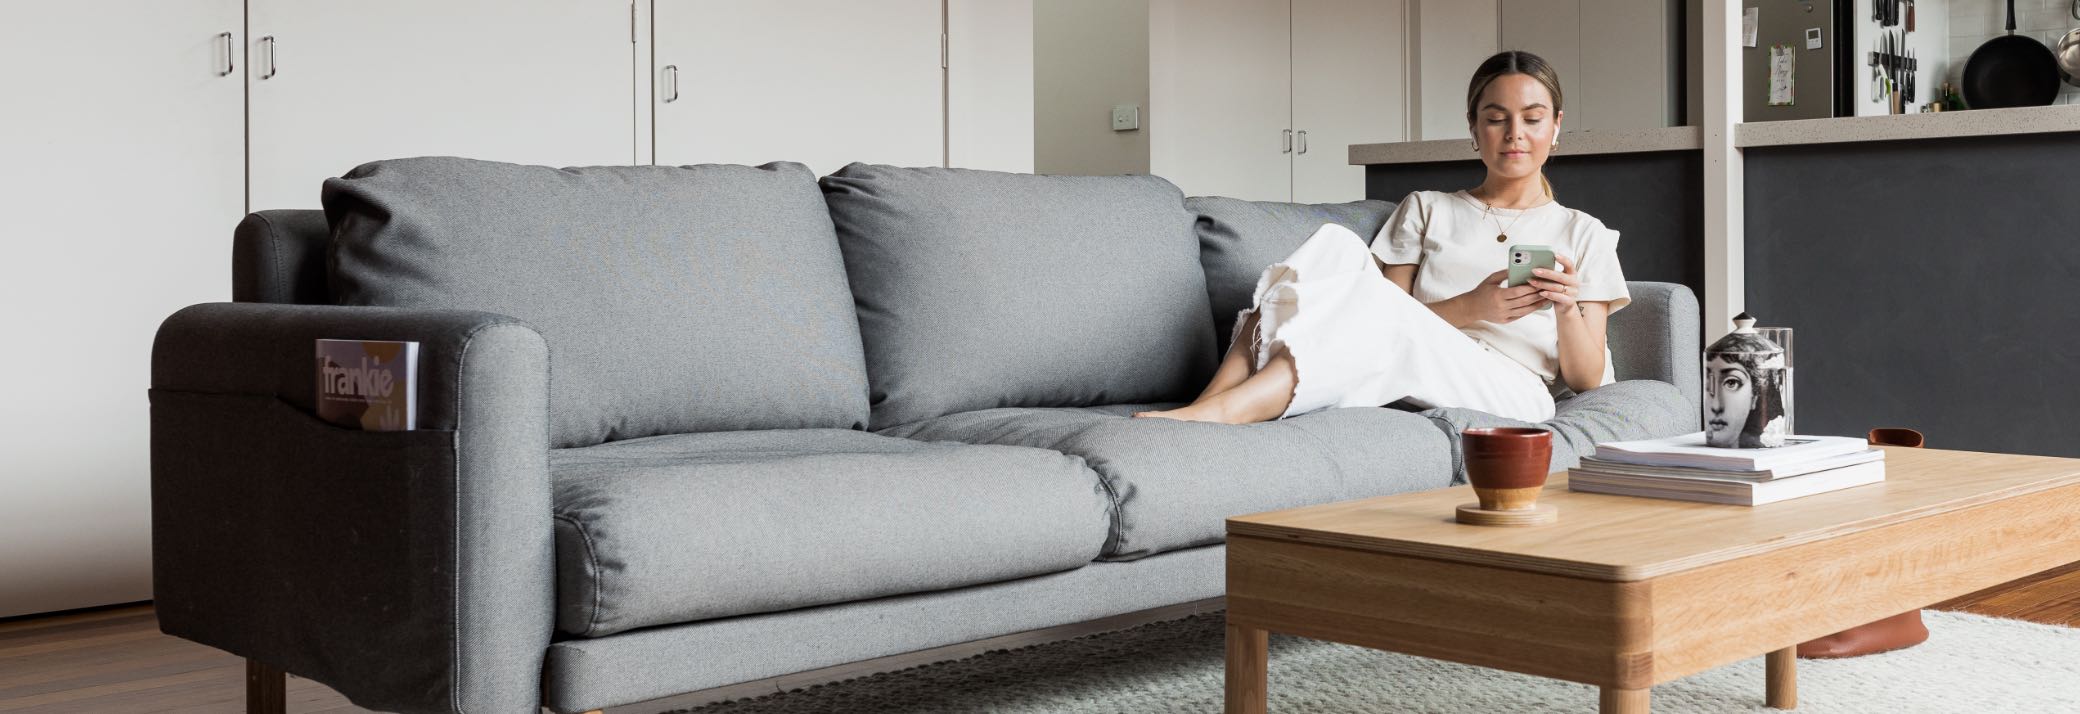 Watch our Head of Design explain how we made the All Day Sofa